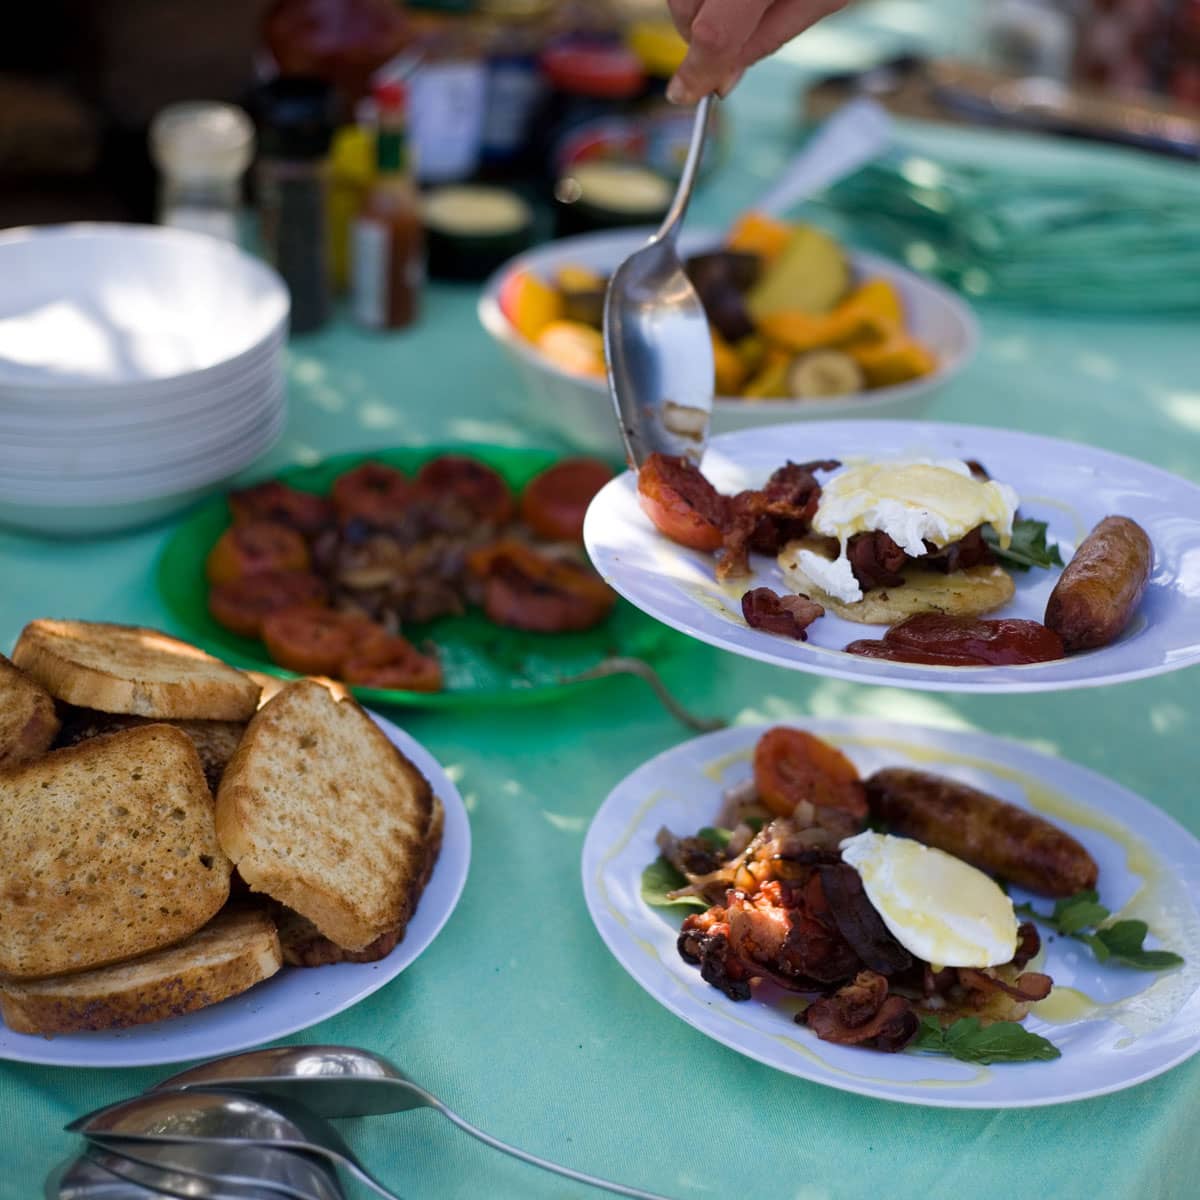 Variety of breakfast foods including toast and eggs